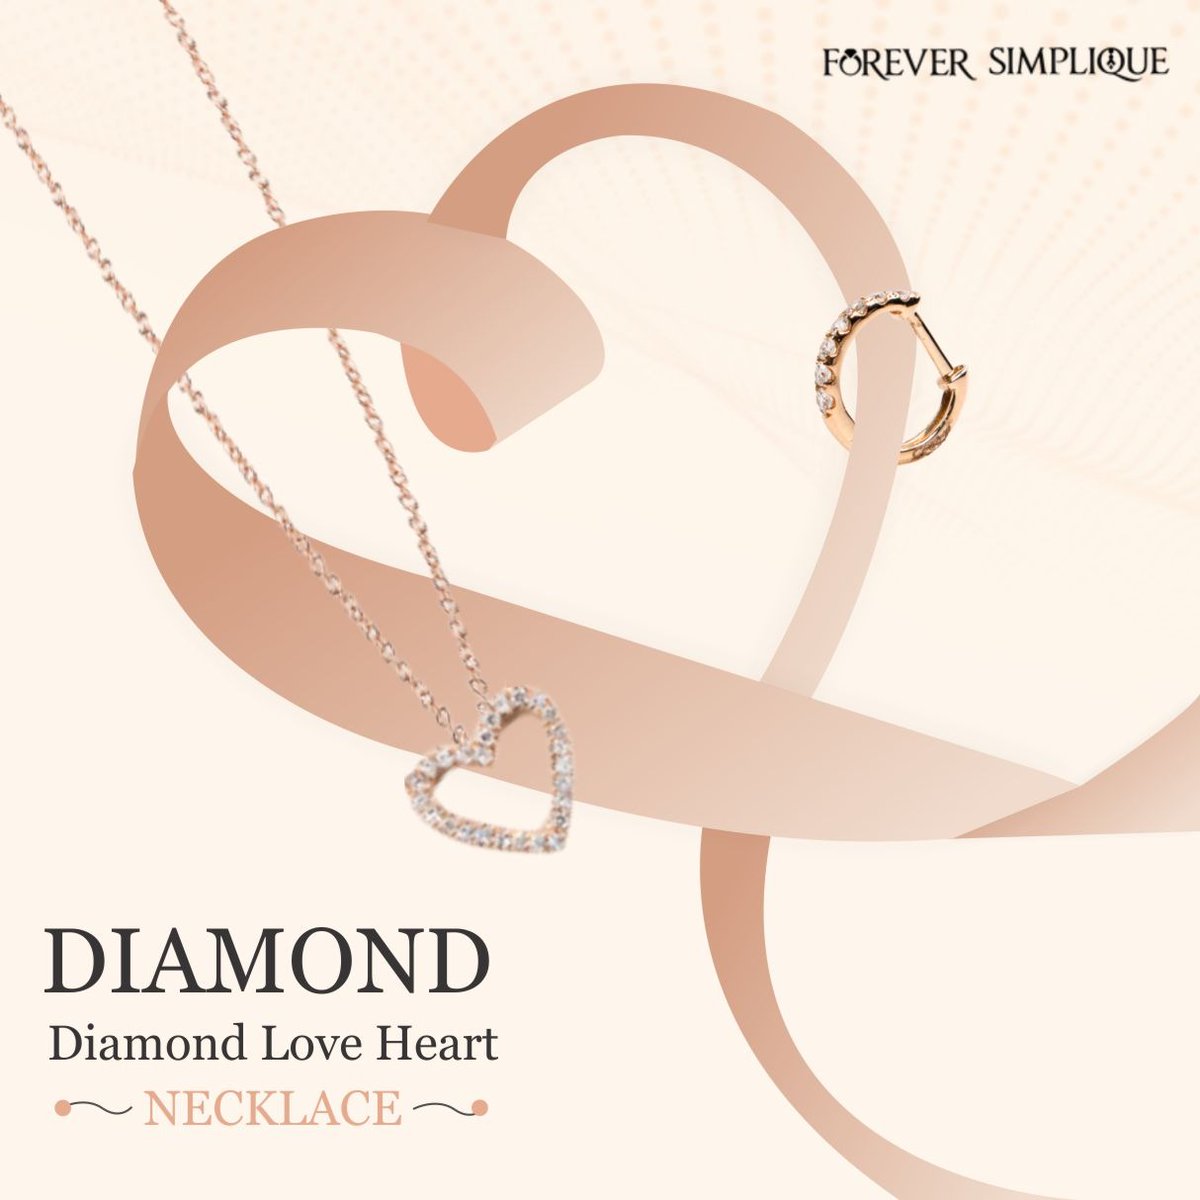 Celebrate everlasting love with this stunning diamond heart necklace and earring set! 

Shop now at foreversimplique.com!  
Call us at 888-367-0106

#DiamondJewelry #HeartNecklace #EarringSet #SparklingDiamonds #TimelessDesign #RomanticGift #SweetheartGift #foreversimplique